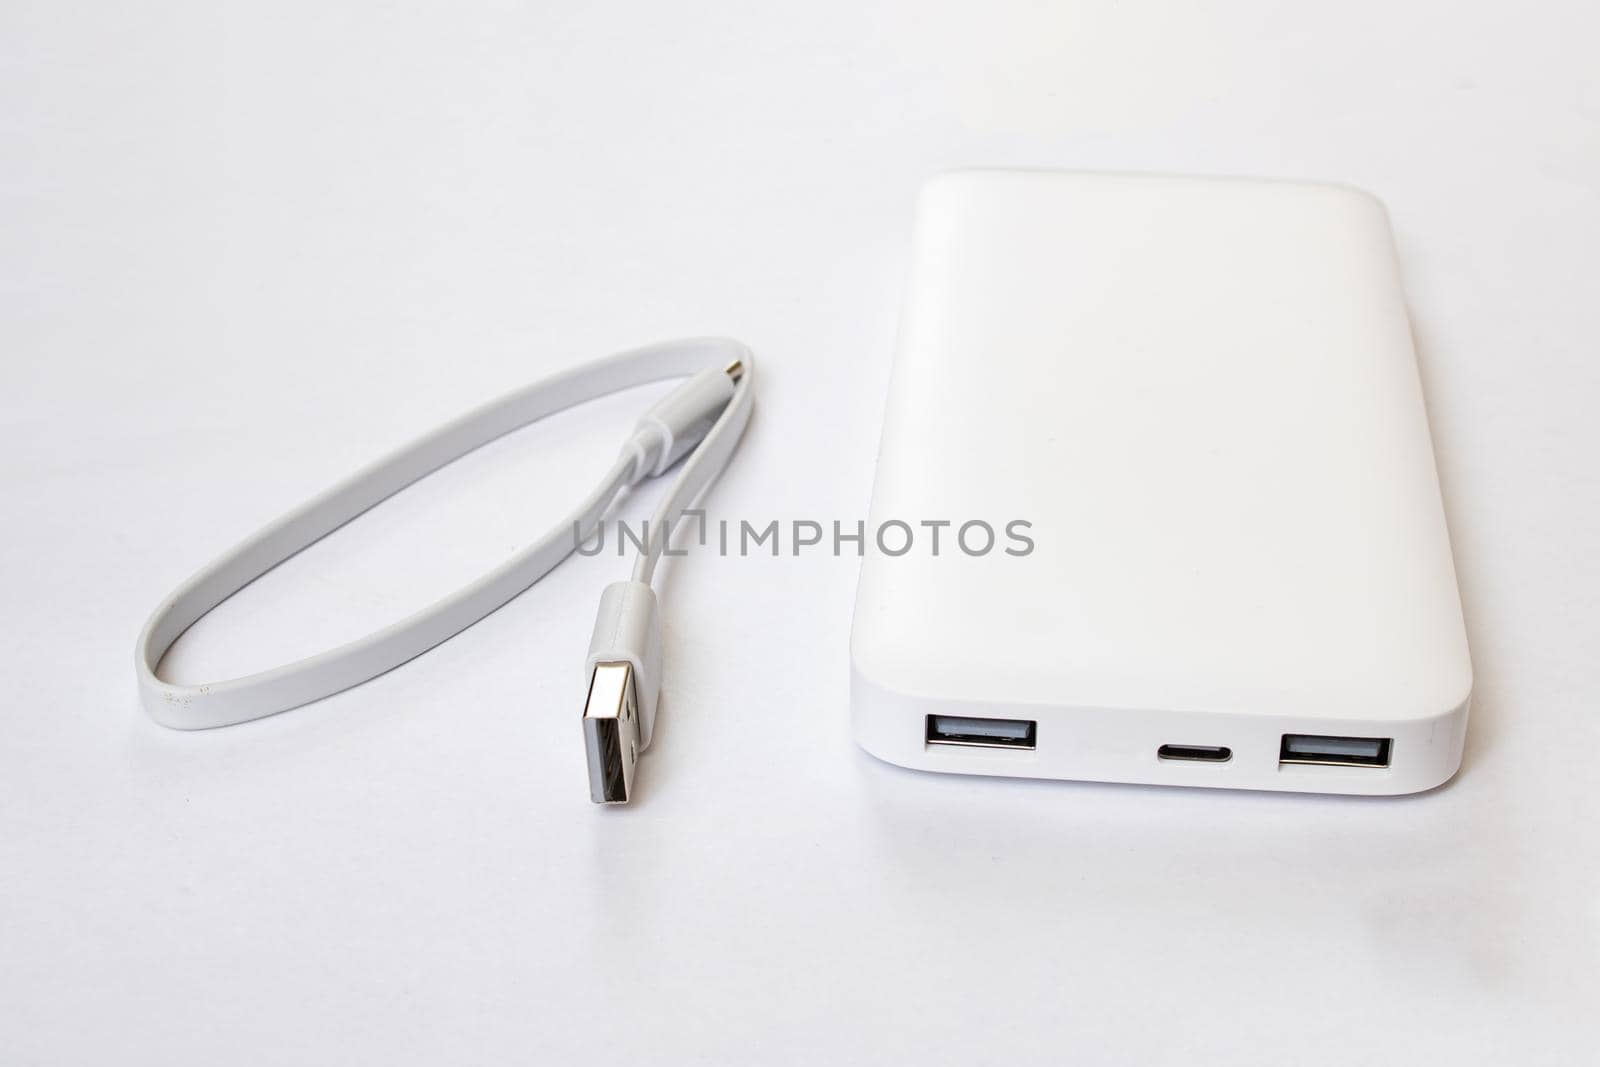 White power bank and cable on white background